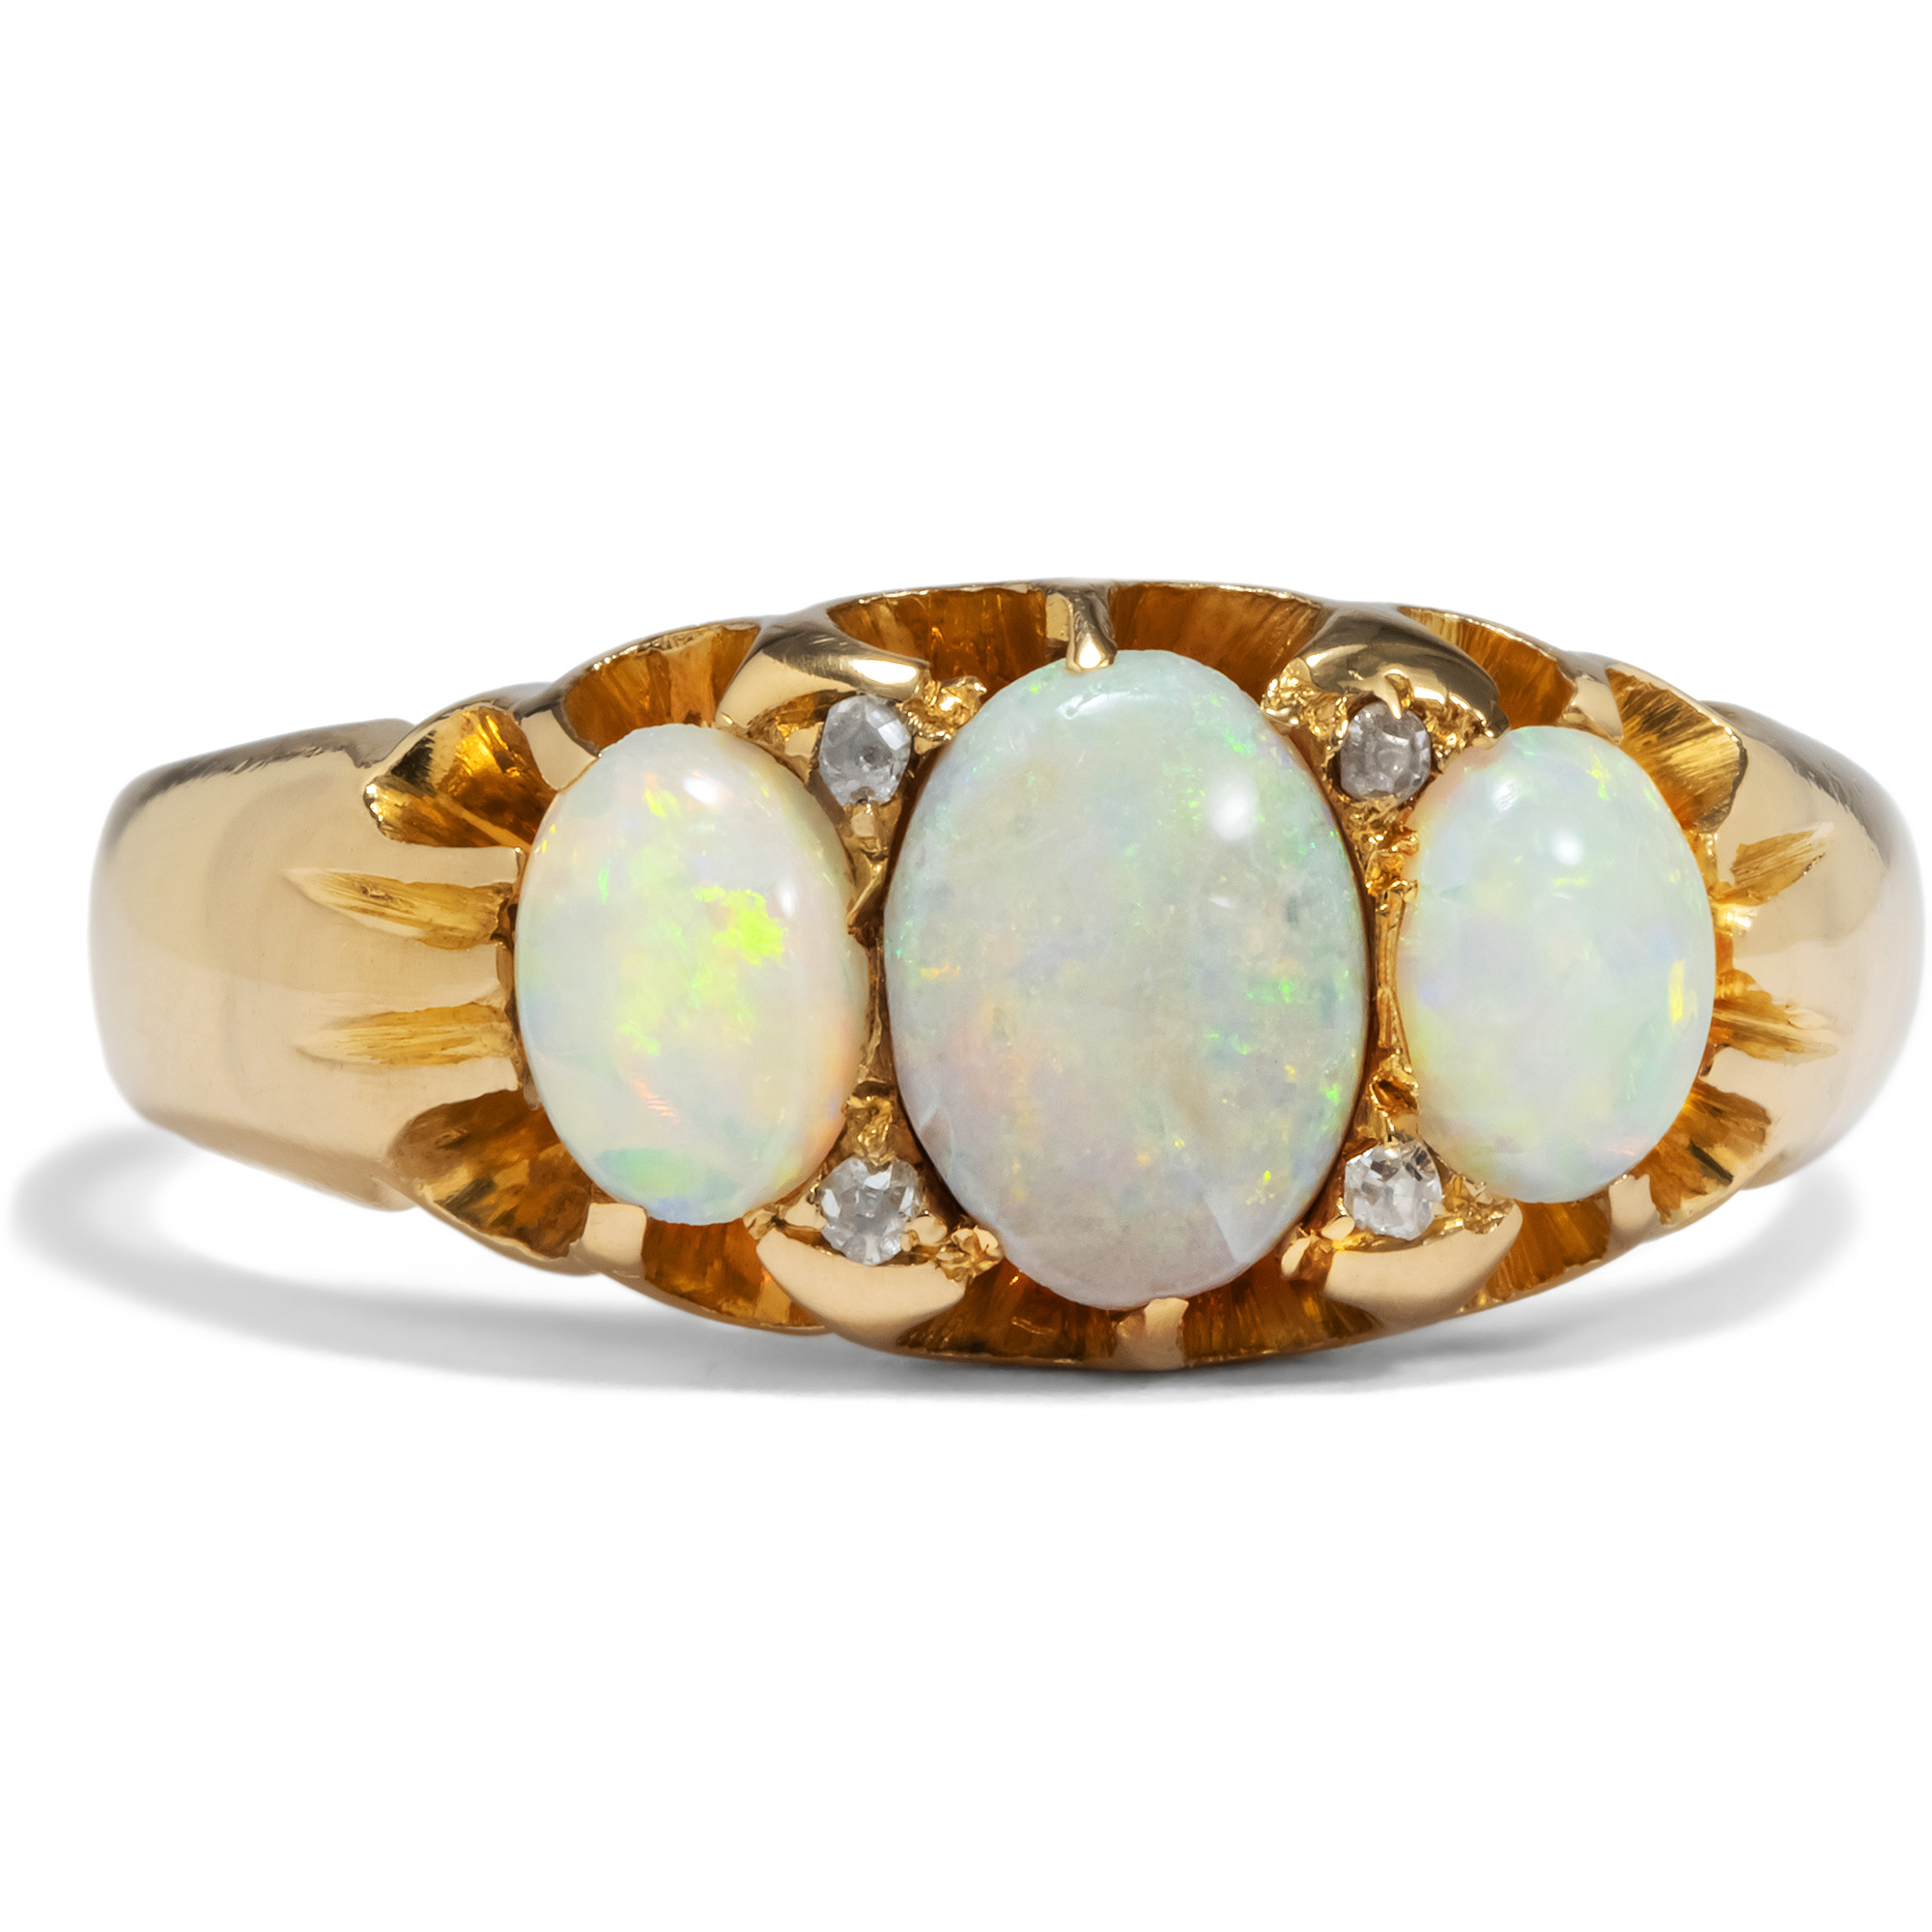 Antique Opal & Diamond Ring in Gold, England, dated 1901